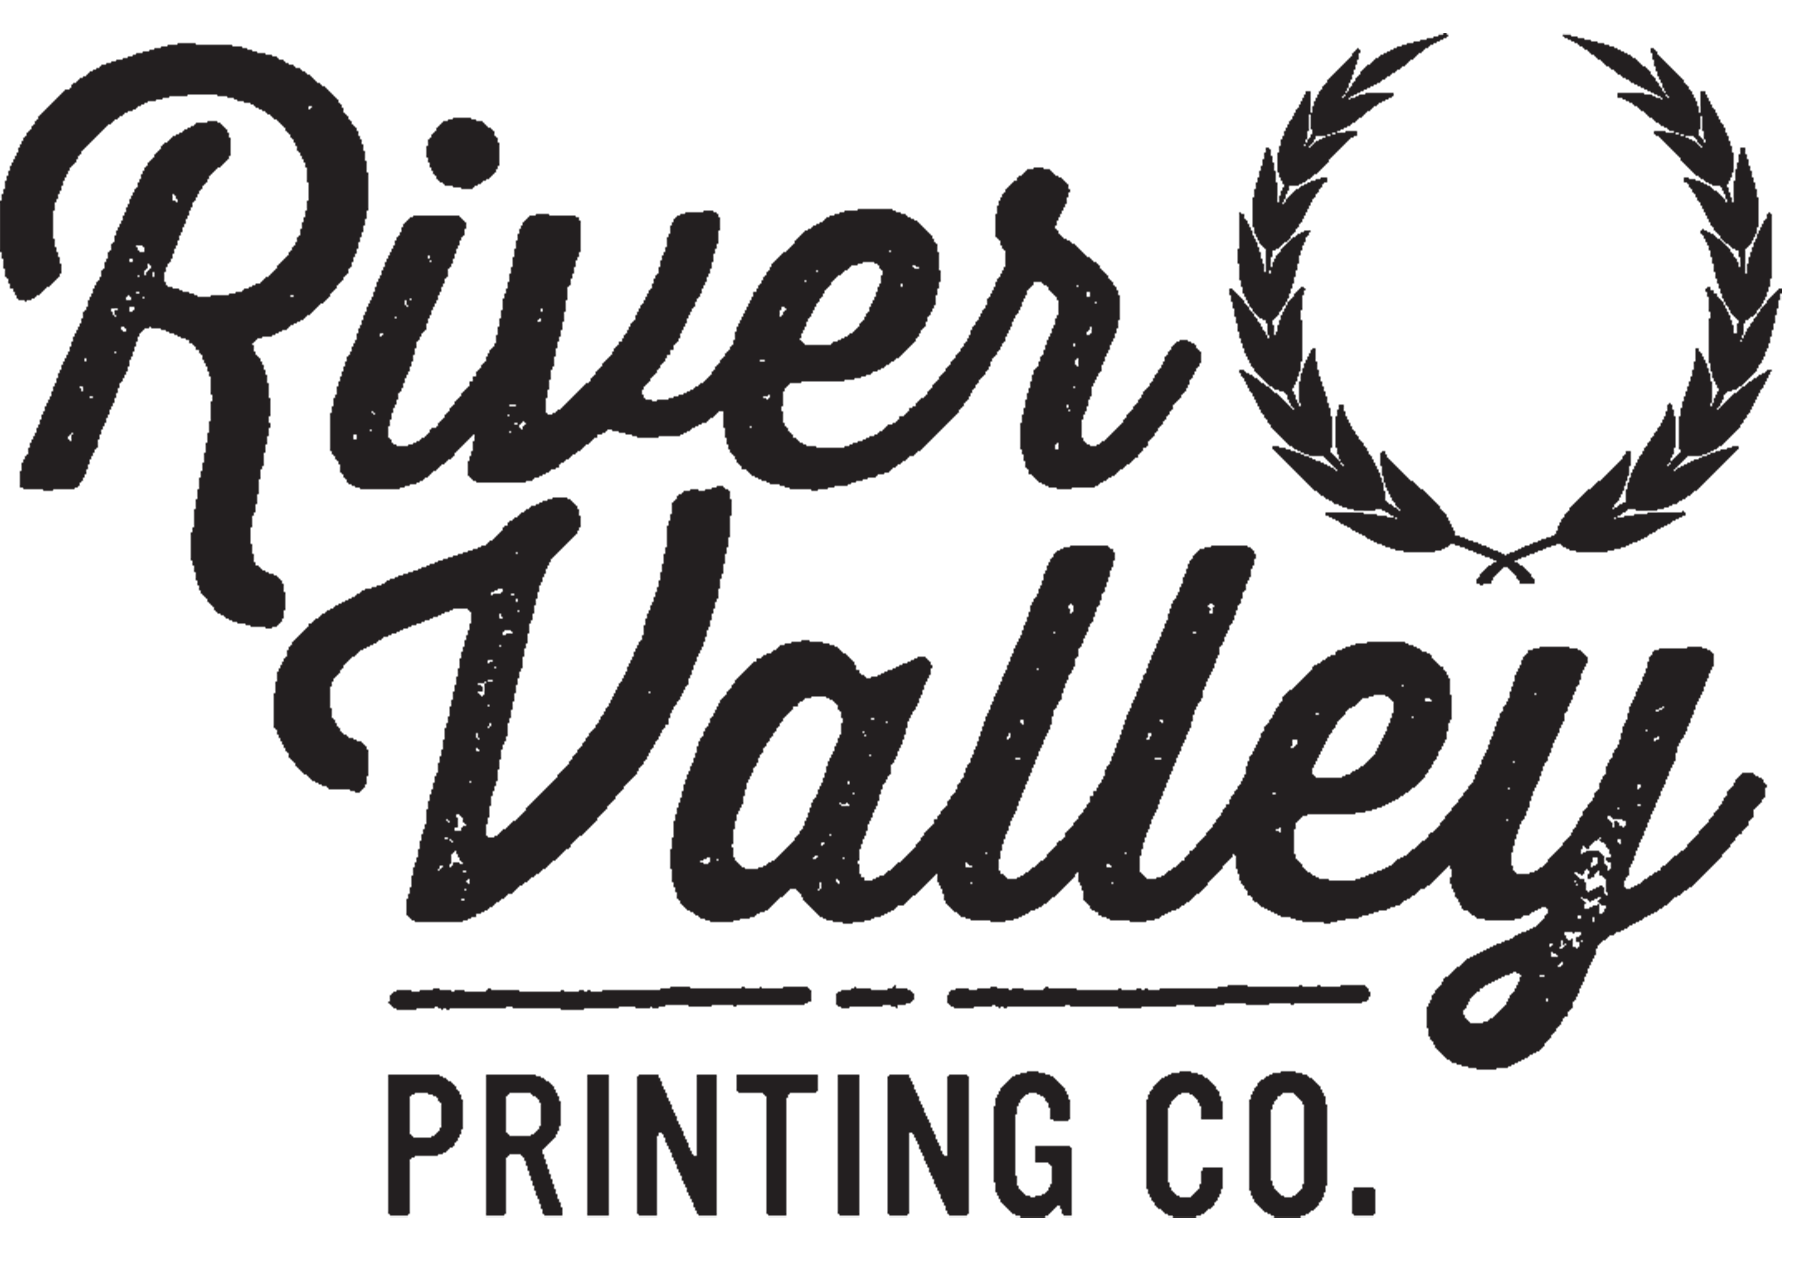 River Valley Printing Co